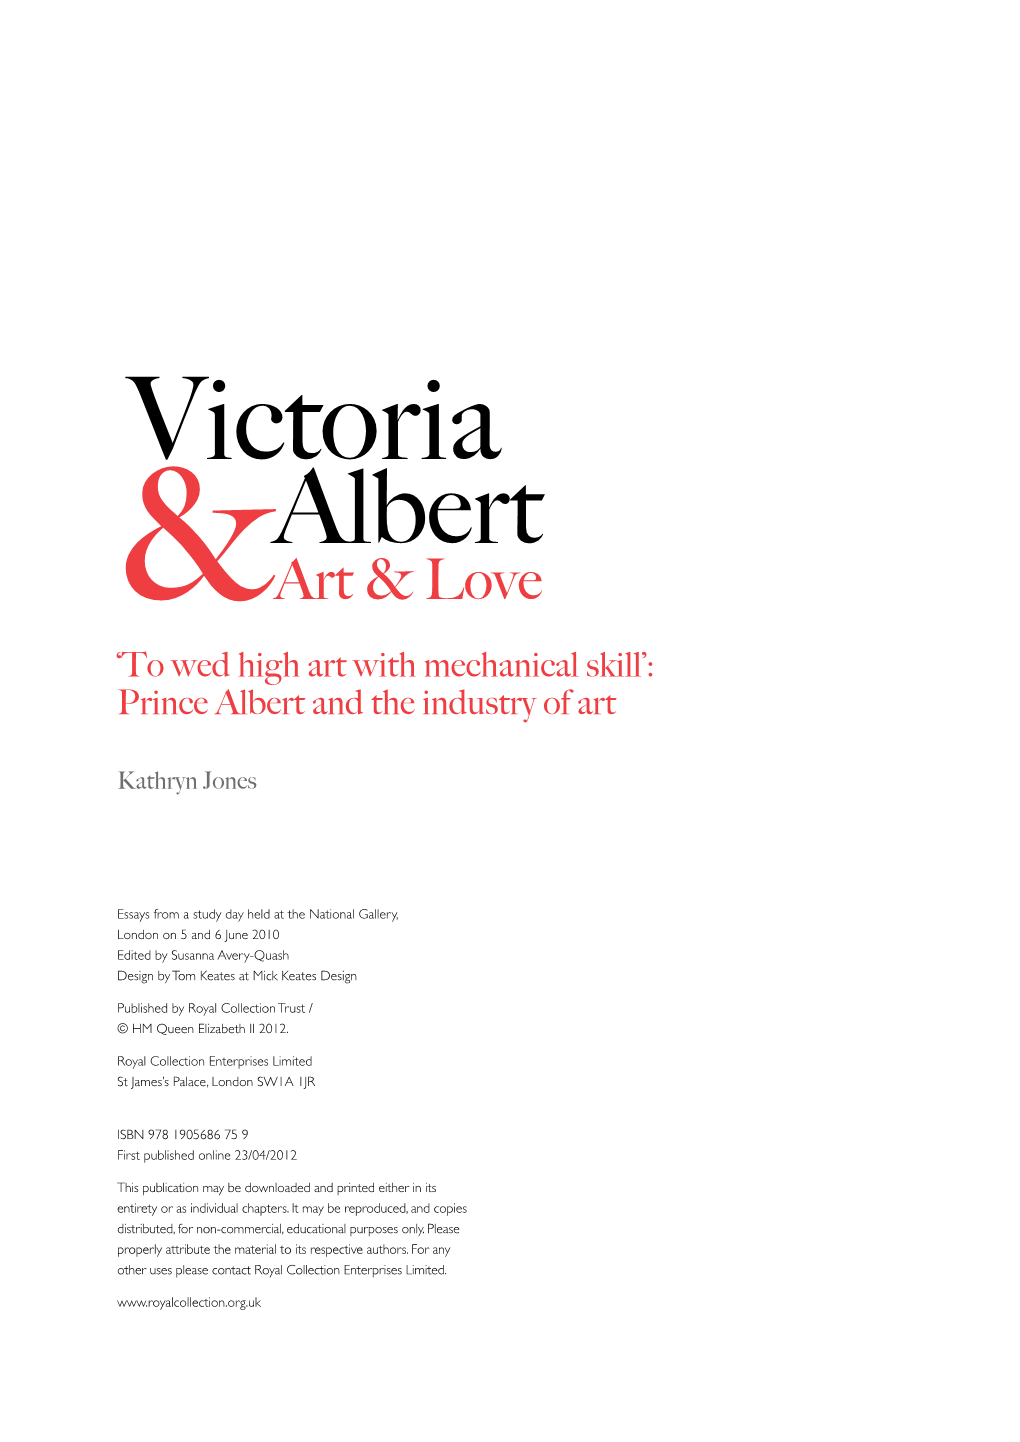 Prince Albert and the Industry of Art